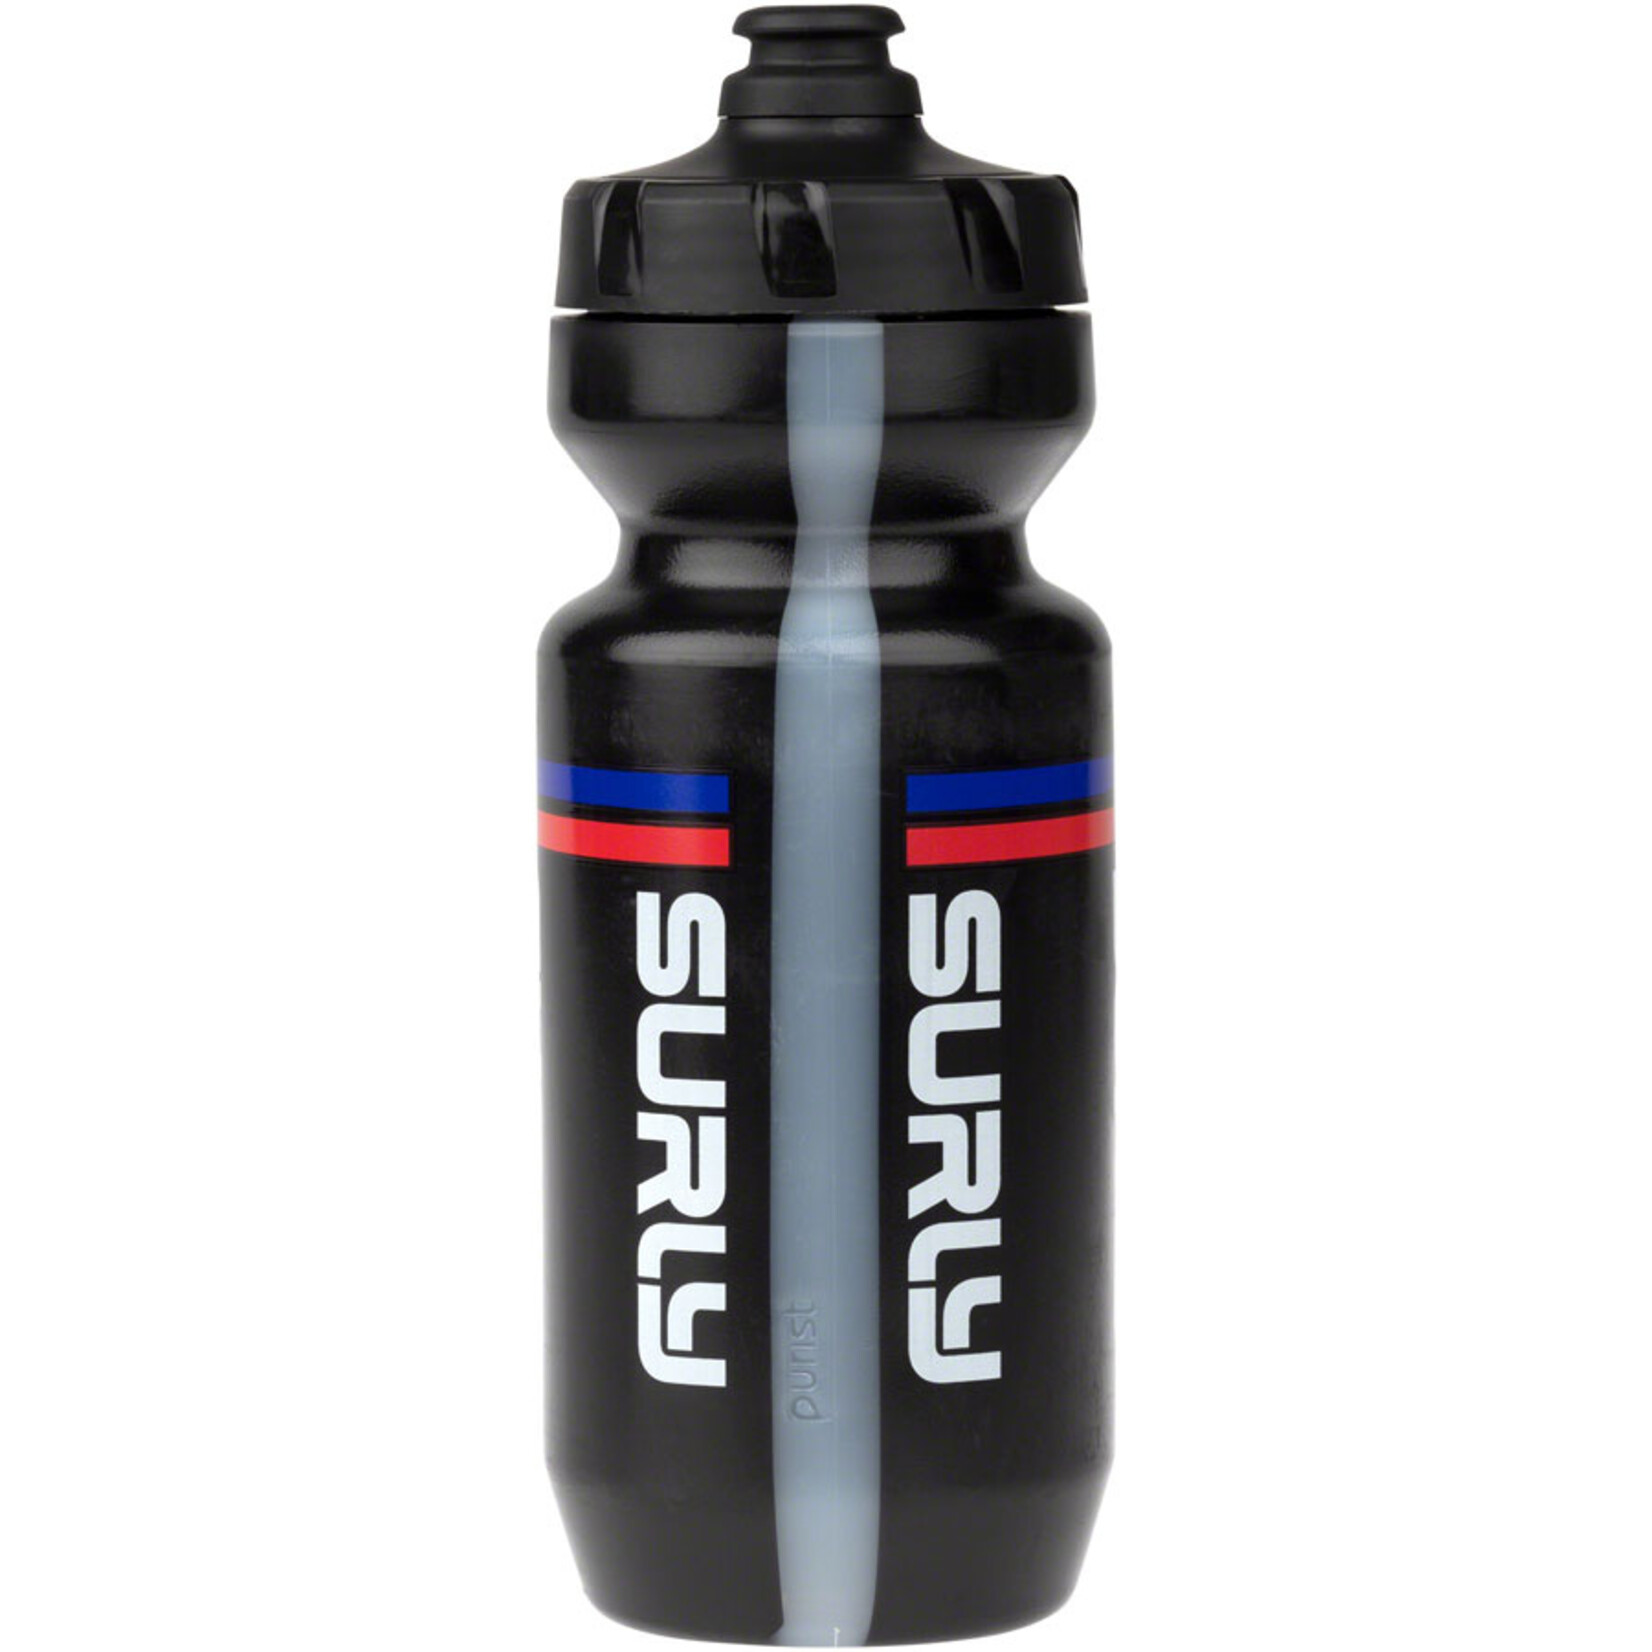 Surly Surly Intergalactic Purist Non-Insulated Water Bottle - Black/Red/Blue, 22 oz